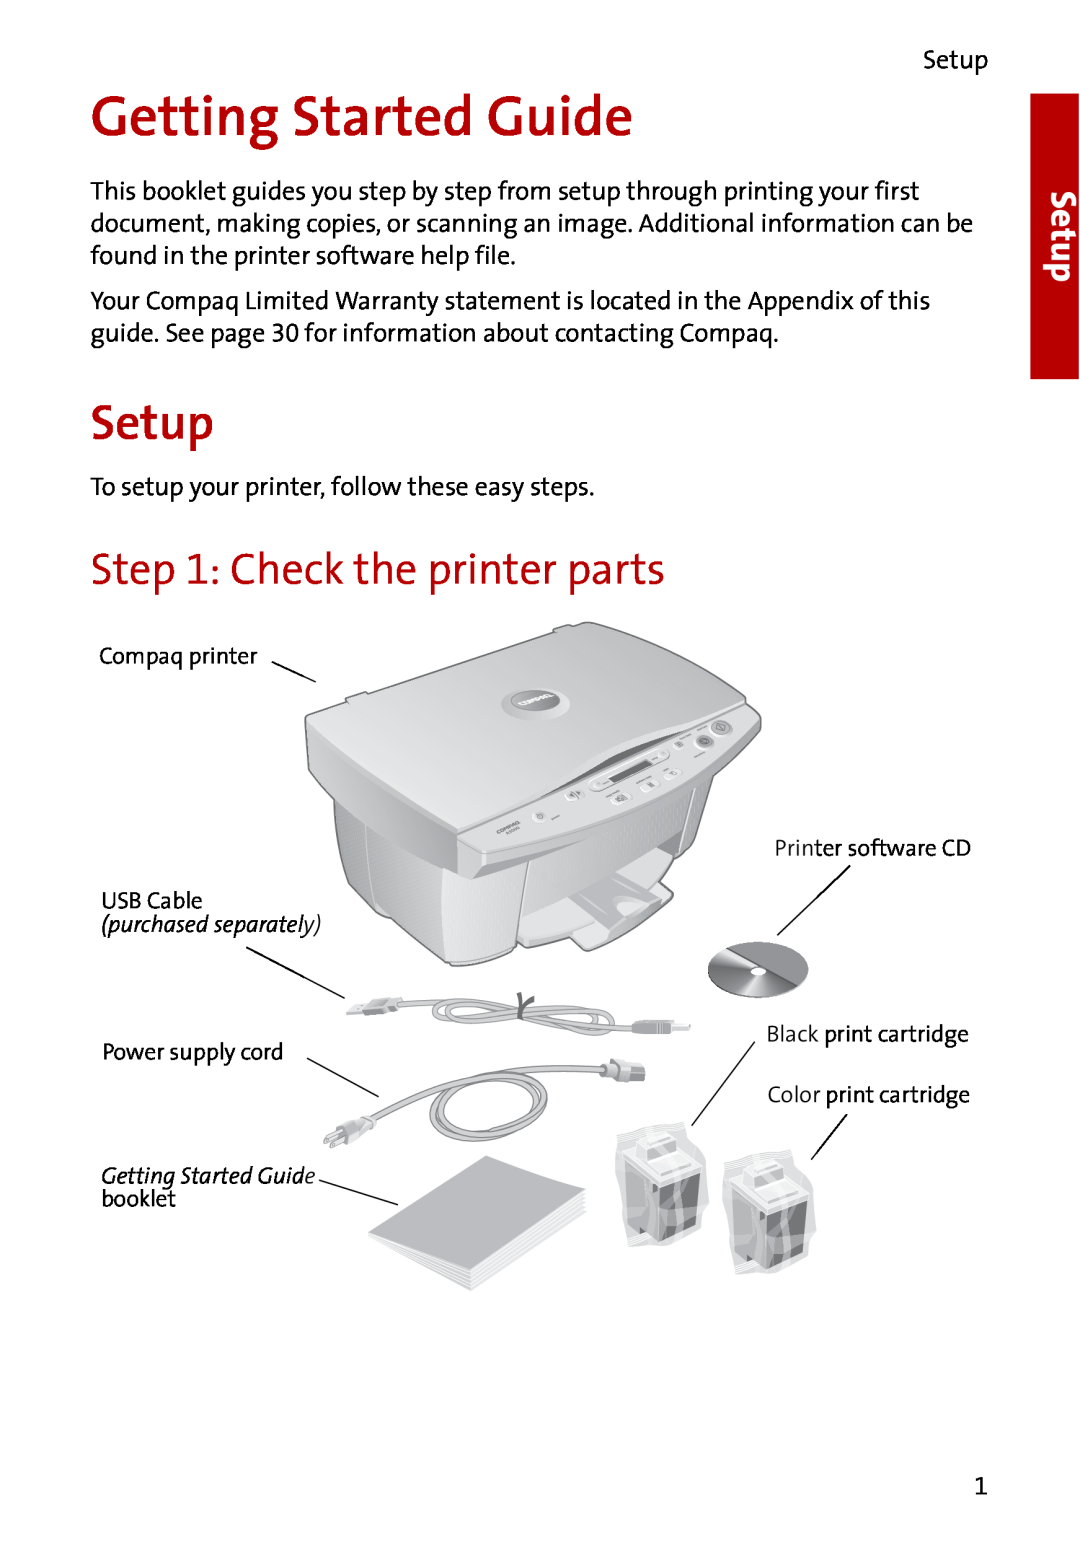 Compaq A3000 manual Getting Started Guide, Setup, Check the printer parts 